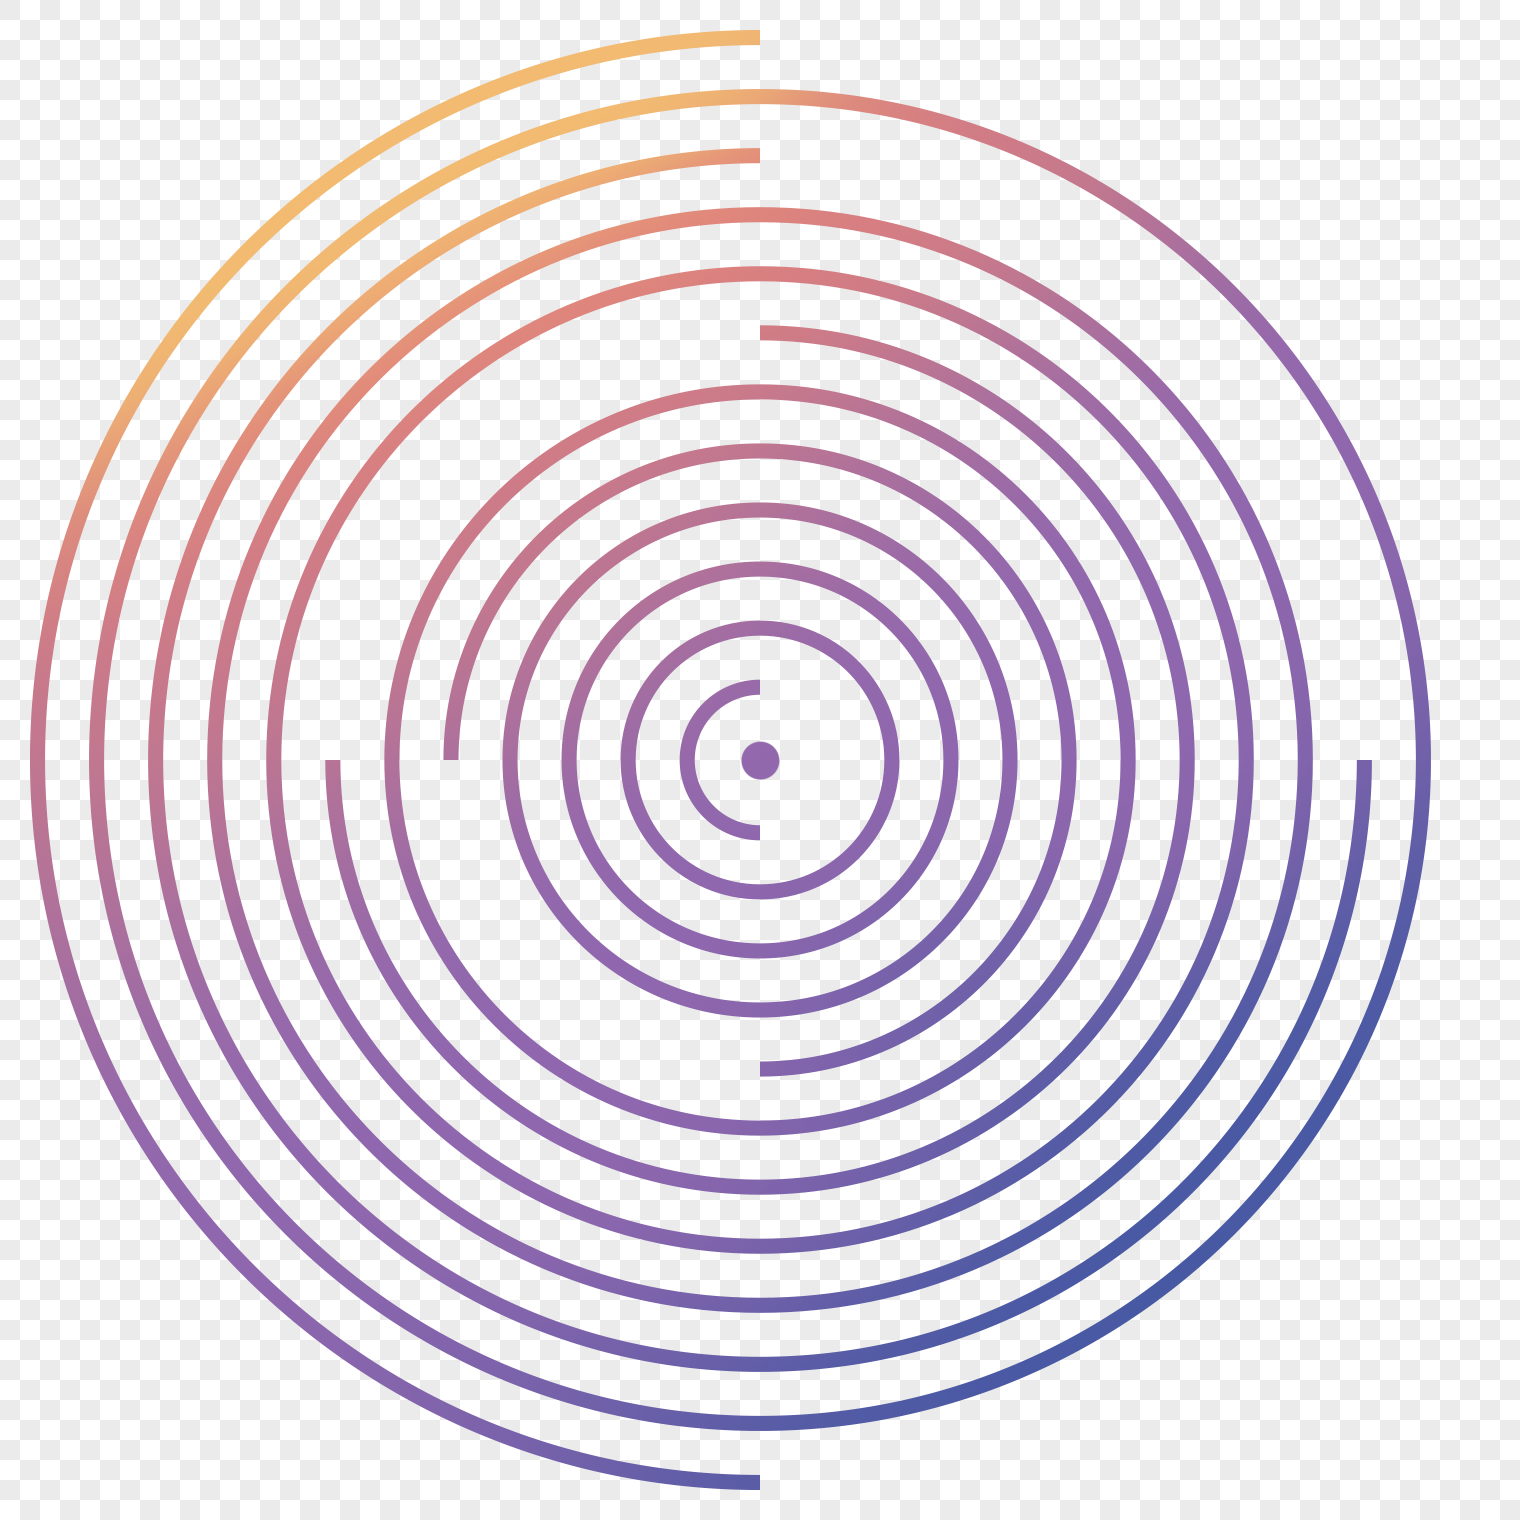 Transparent Spiral Animated Gif Image Free Library - Circle, HD Png  Download - 912x947(#1201608) - PngFind